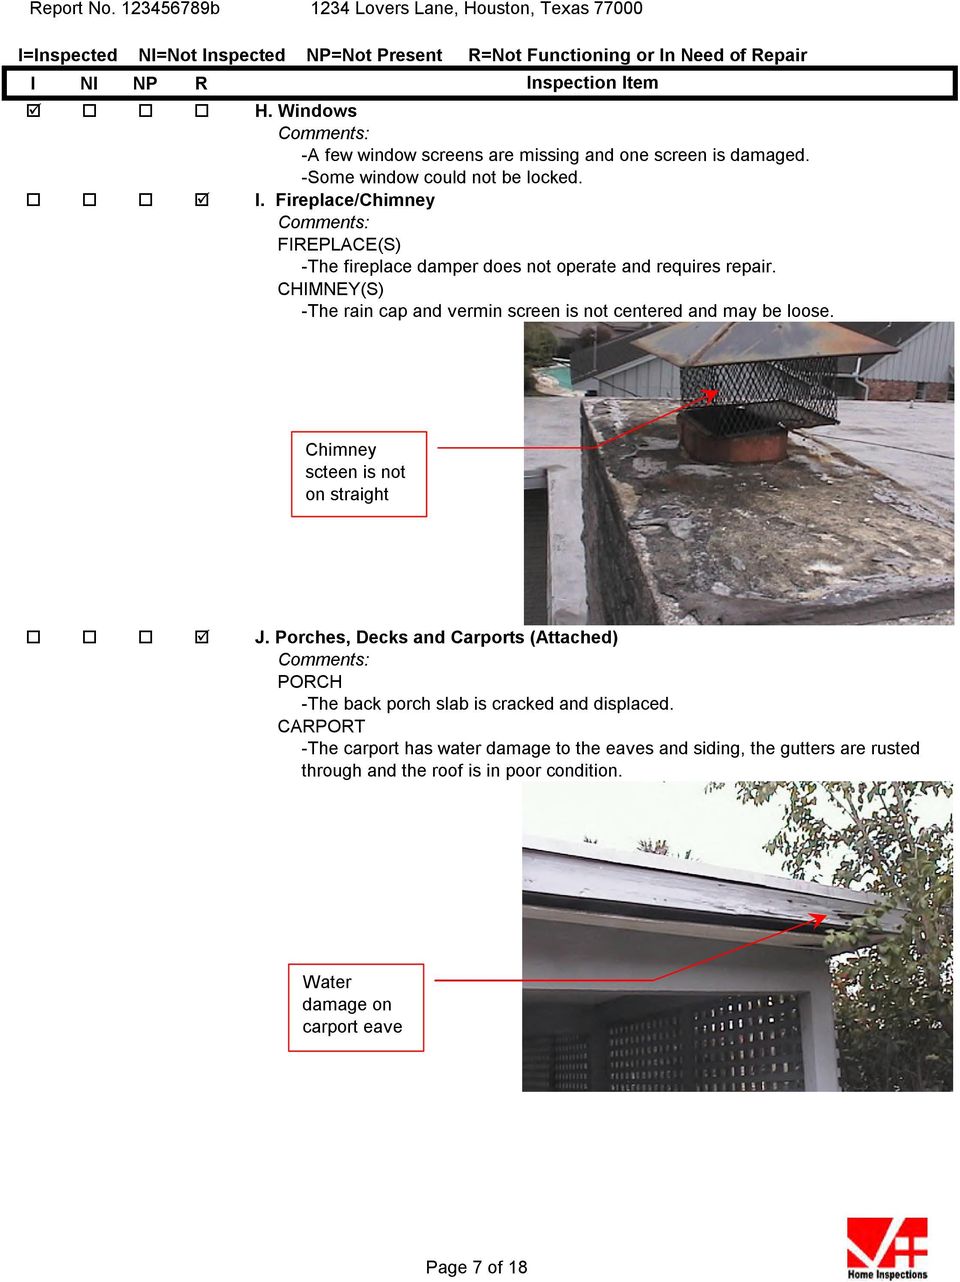 CHIMNEY(S) -The rain cap and vermin screen is not centered and may be loose. Chimney scteen is not on straight o o o J.